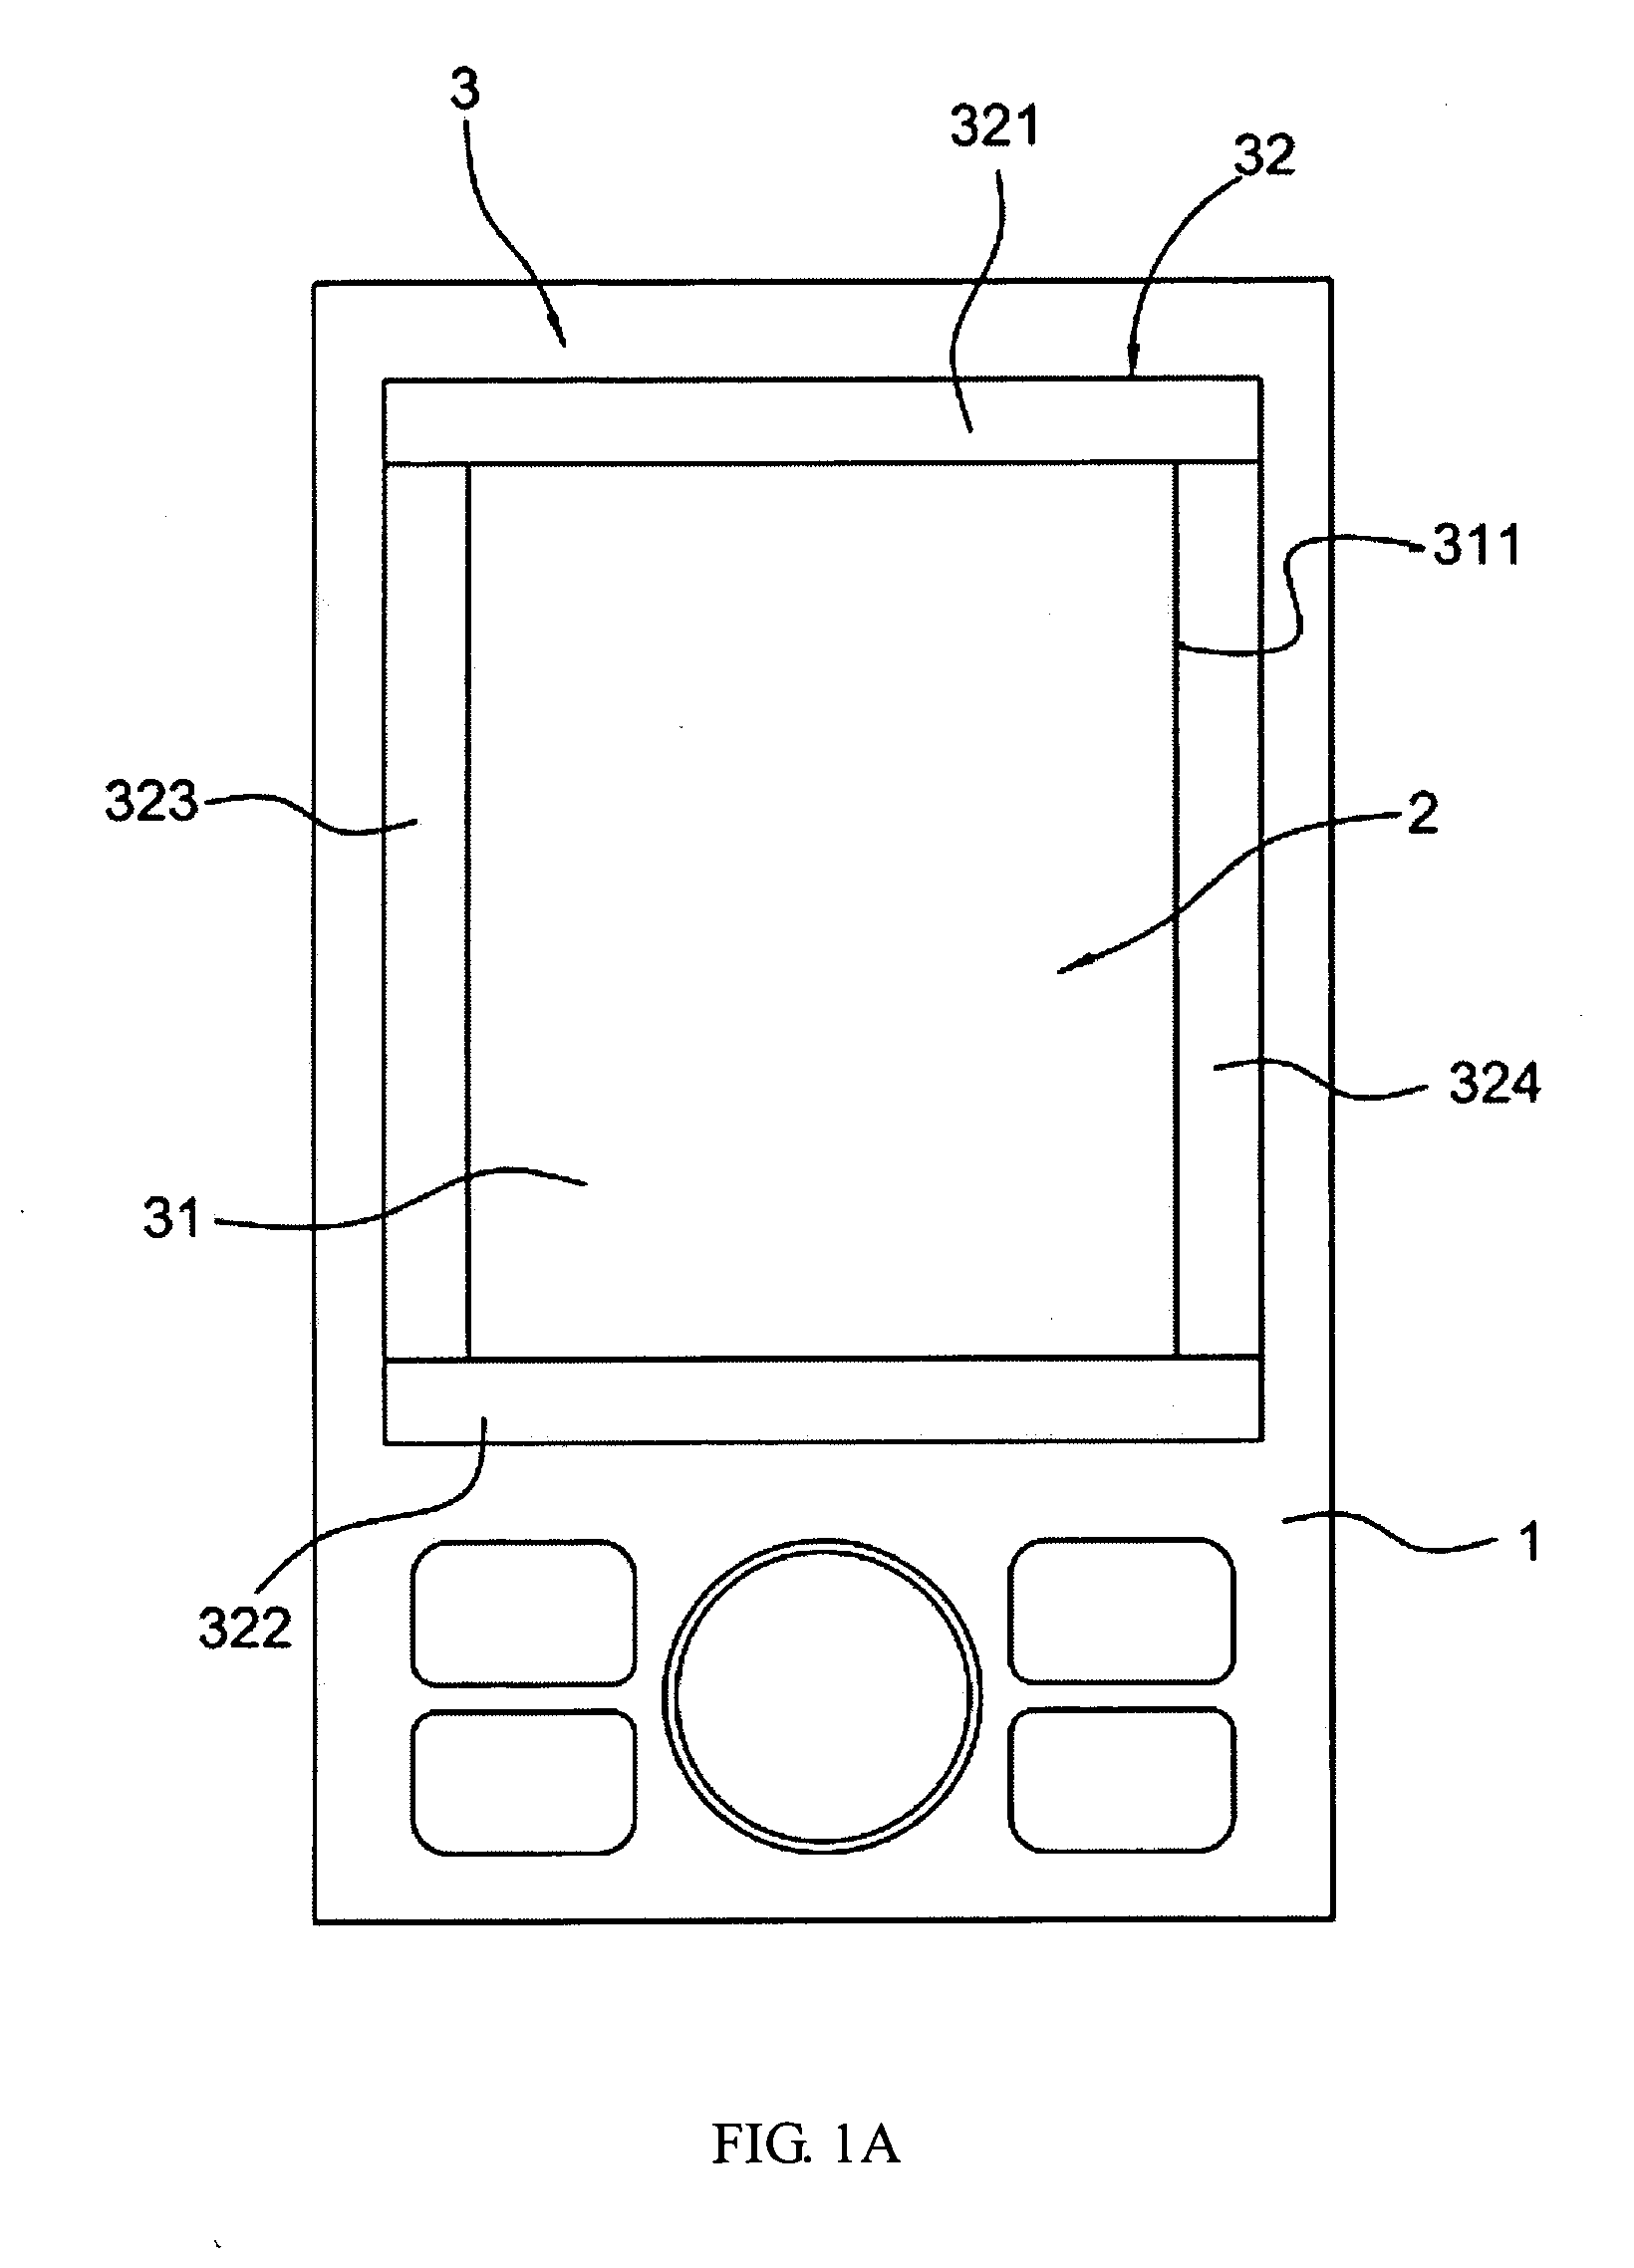 Method and apparatus for performing view switching functions on handheld electronic device with touch screen